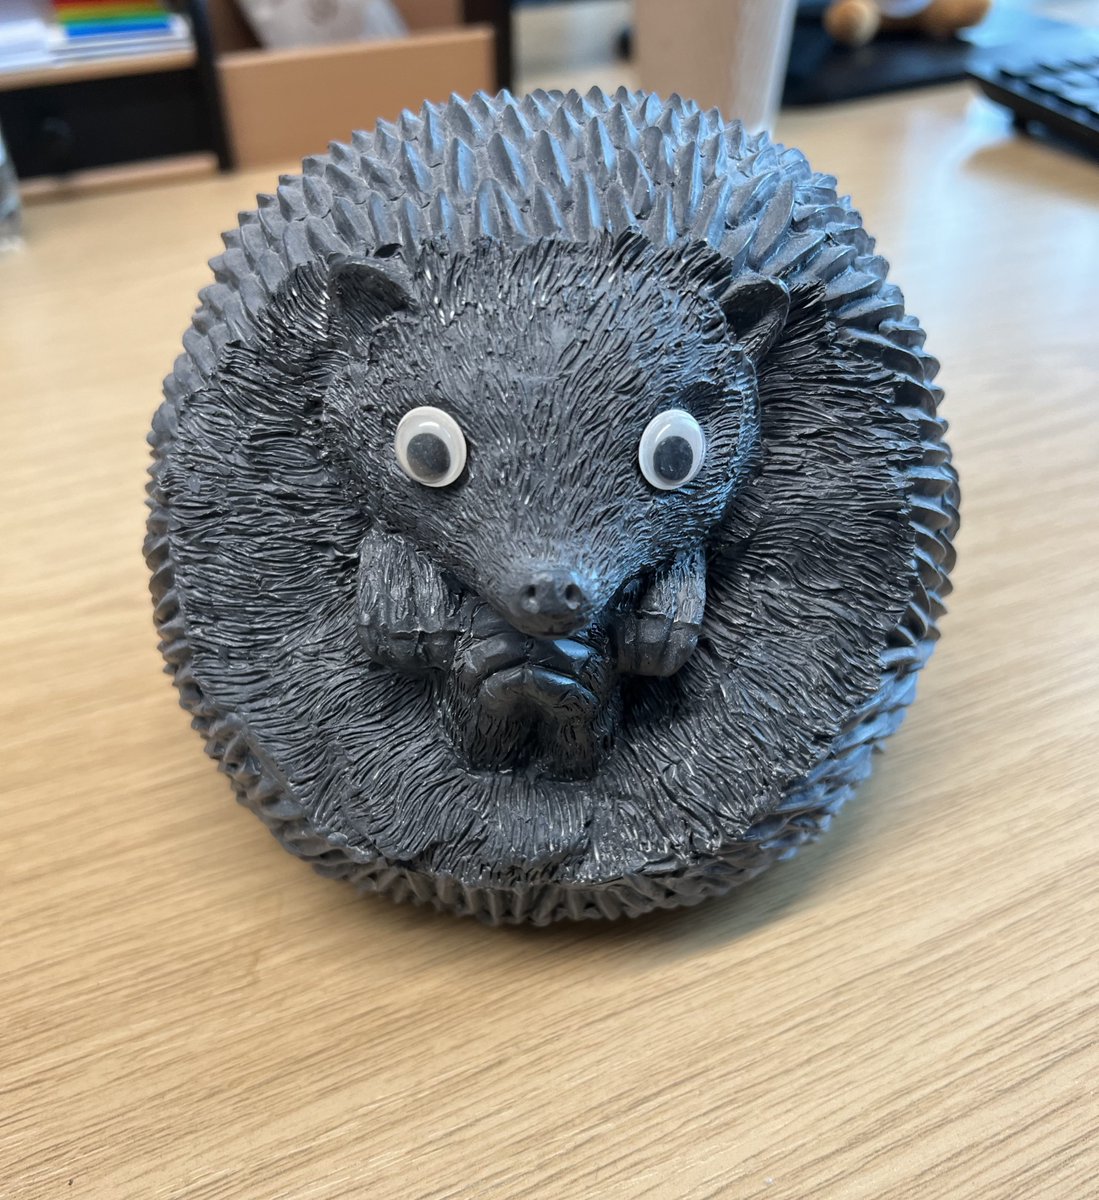 I am not responsible for the googly eyes on the office hedgehog, officer.